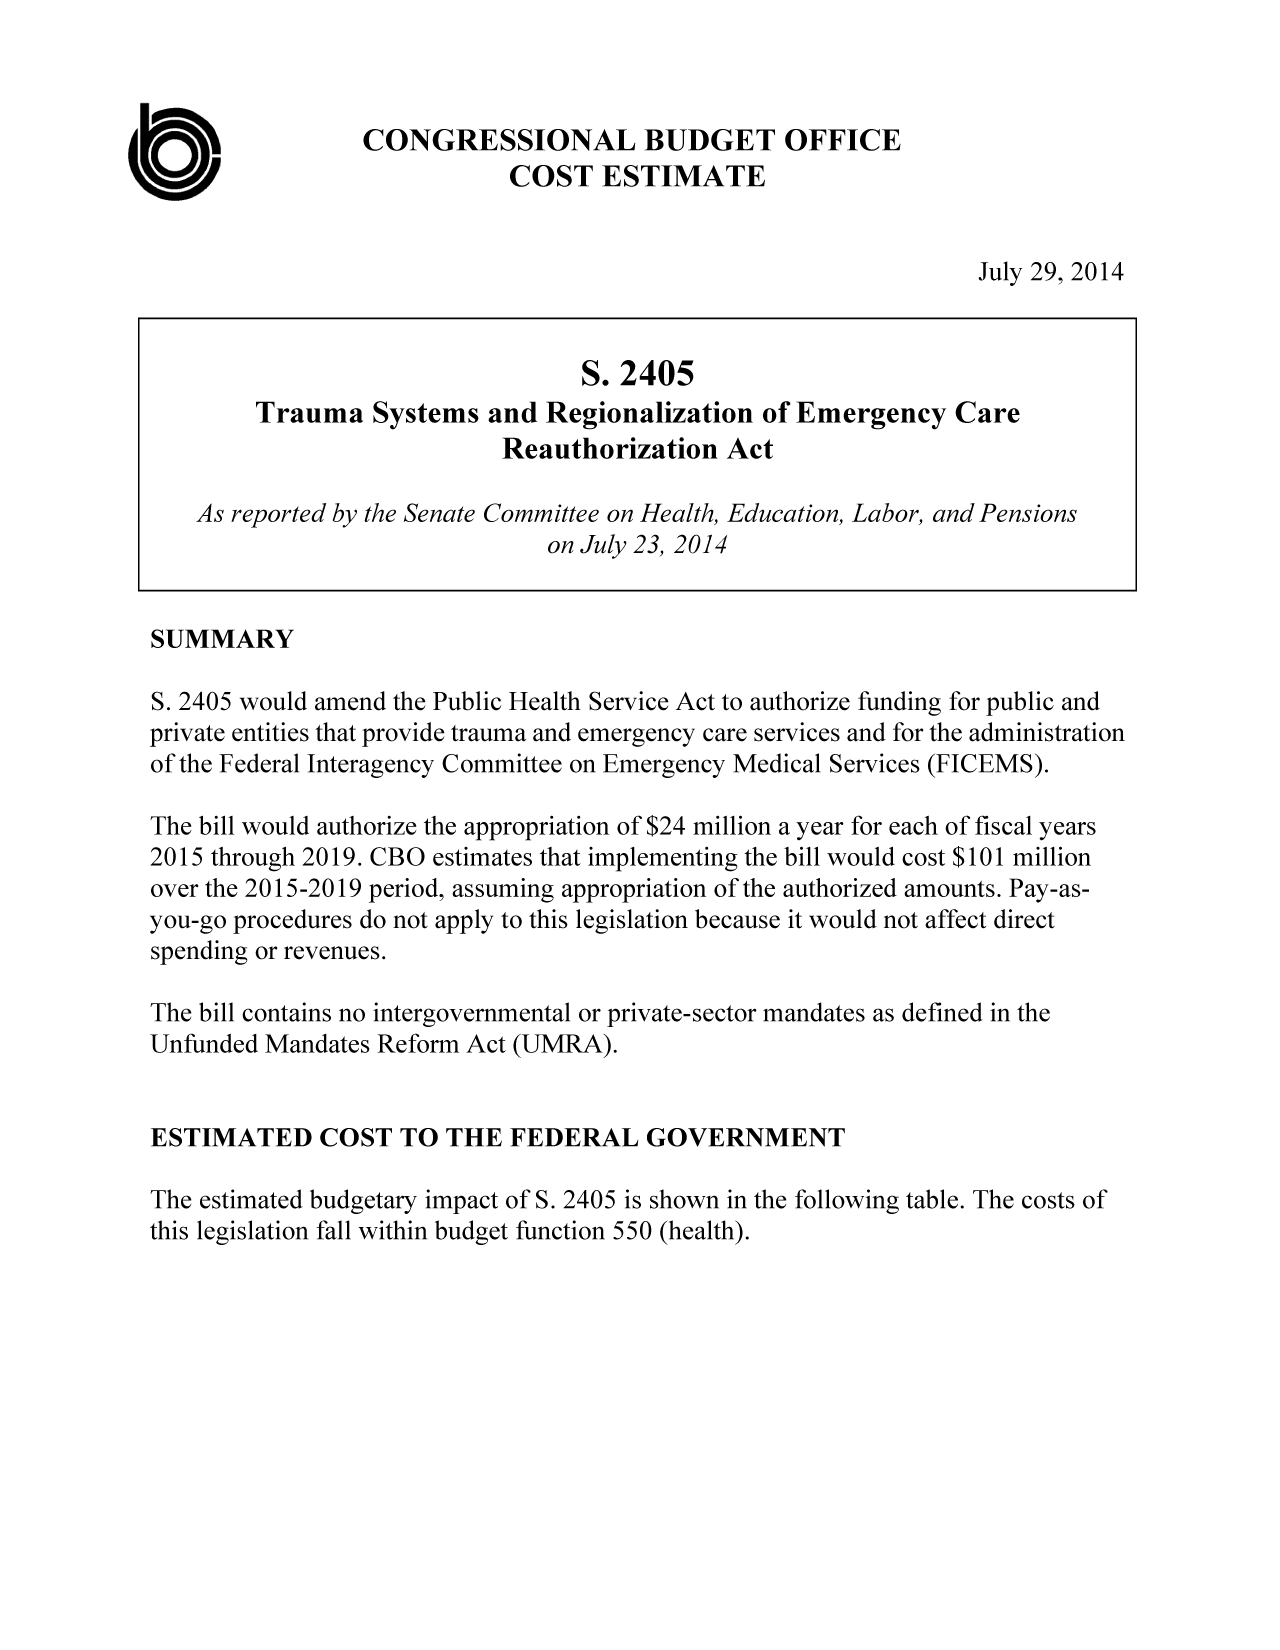 handle is hein.congrec/cbo1823 and id is 1 raw text is: CONGRESSIONAL BUDGET OFFICE
COST ESTIMATE

July 29, 2014

S. 2405
Trauma Systems and Regionalization of Emergency Care
Reauthorization Act
As reported by the Senate Committee on Health, Education, Labor, and Pensions
on July 23, 2014
SUMMARY
S. 2405 would amend the Public Health Service Act to authorize funding for public and
private entities that provide trauma and emergency care services and for the administration
of the Federal Interagency Committee on Emergency Medical Services (FICEMS).
The bill would authorize the appropriation of $24 million a year for each of fiscal years
2015 through 2019. CBO estimates that implementing the bill would cost $101 million
over the 2015-2019 period, assuming appropriation of the authorized amounts. Pay-as-
you-go procedures do not apply to this legislation because it would not affect direct
spending or revenues.
The bill contains no intergovernmental or private-sector mandates as defined in the
Unfunded Mandates Reform Act (UMRA).
ESTIMATED COST TO THE FEDERAL GOVERNMENT
The estimated budgetary impact of S. 2405 is shown in the following table. The costs of
this legislation fall within budget function 550 (health).

a


